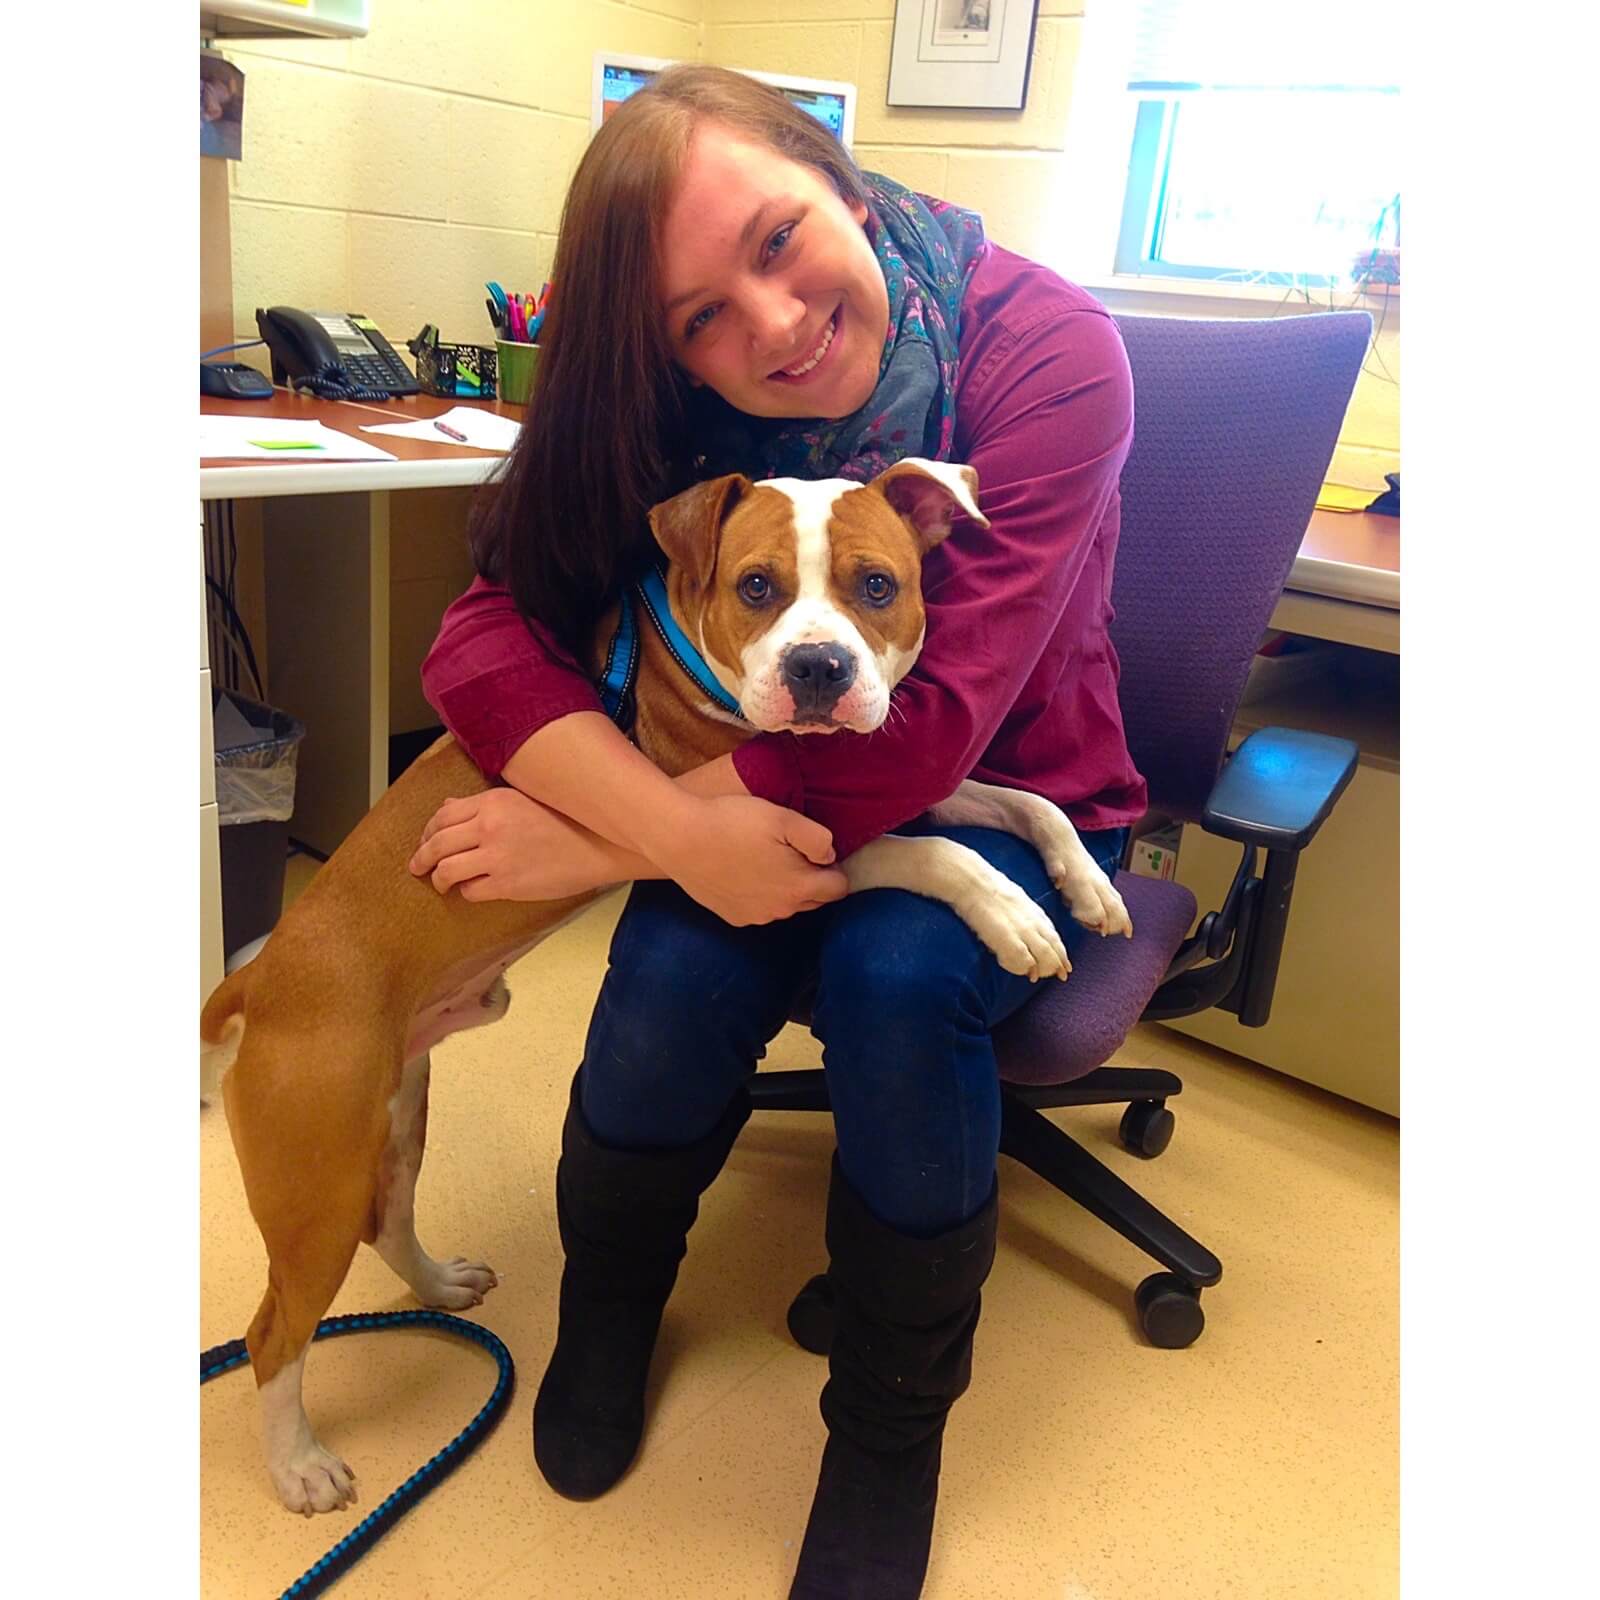 A staff member says "goodbye" to her foster dog who was adopted after going through surgery for a leg wound.